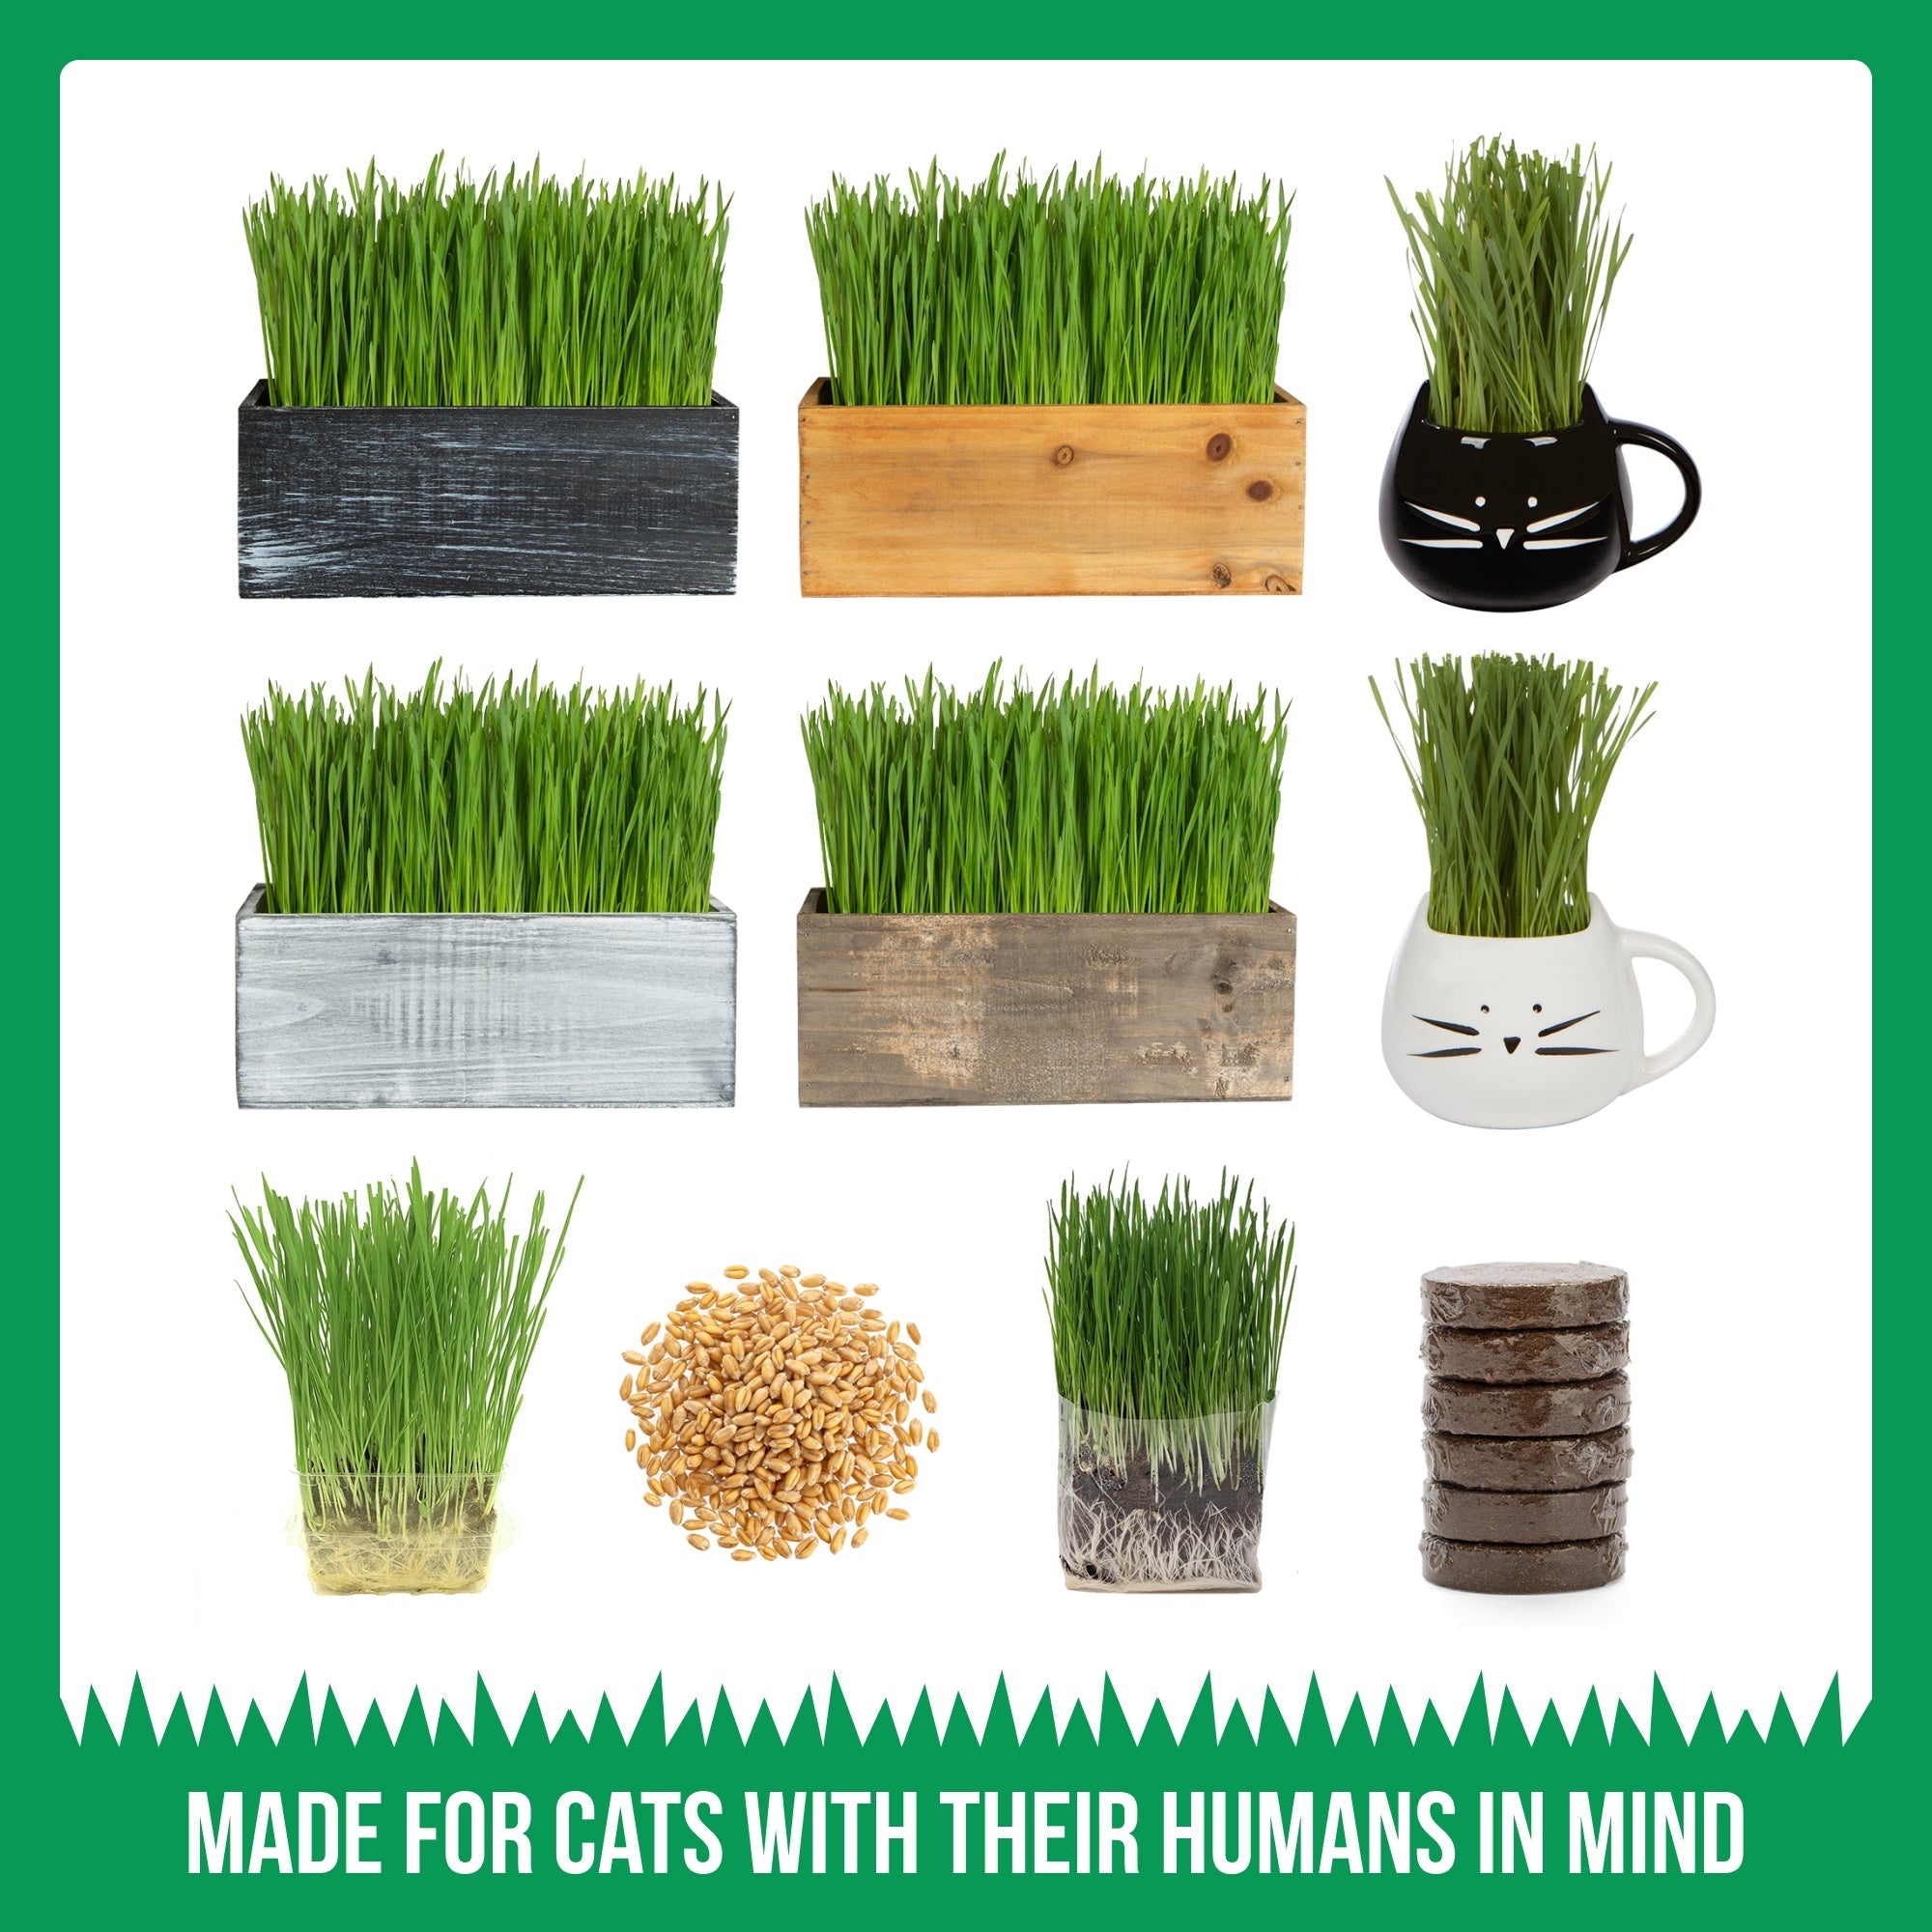 Cat Grass Grow Bag Kit, 3 Pack, All Organic, Just add Water. Made in The USA